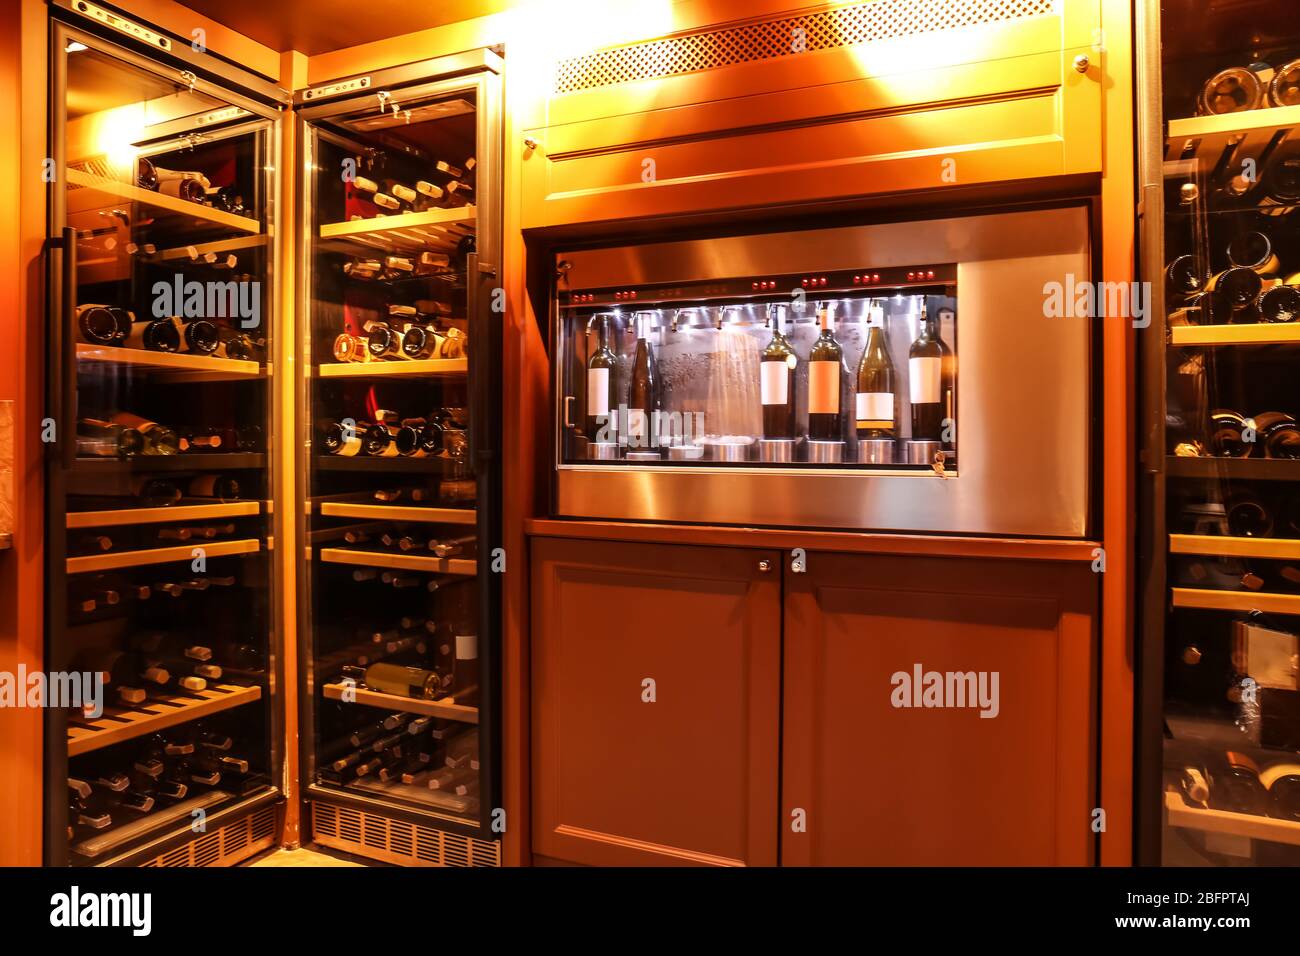 Dispenser and refrigerators with bottles of wine in cellar Stock Photo